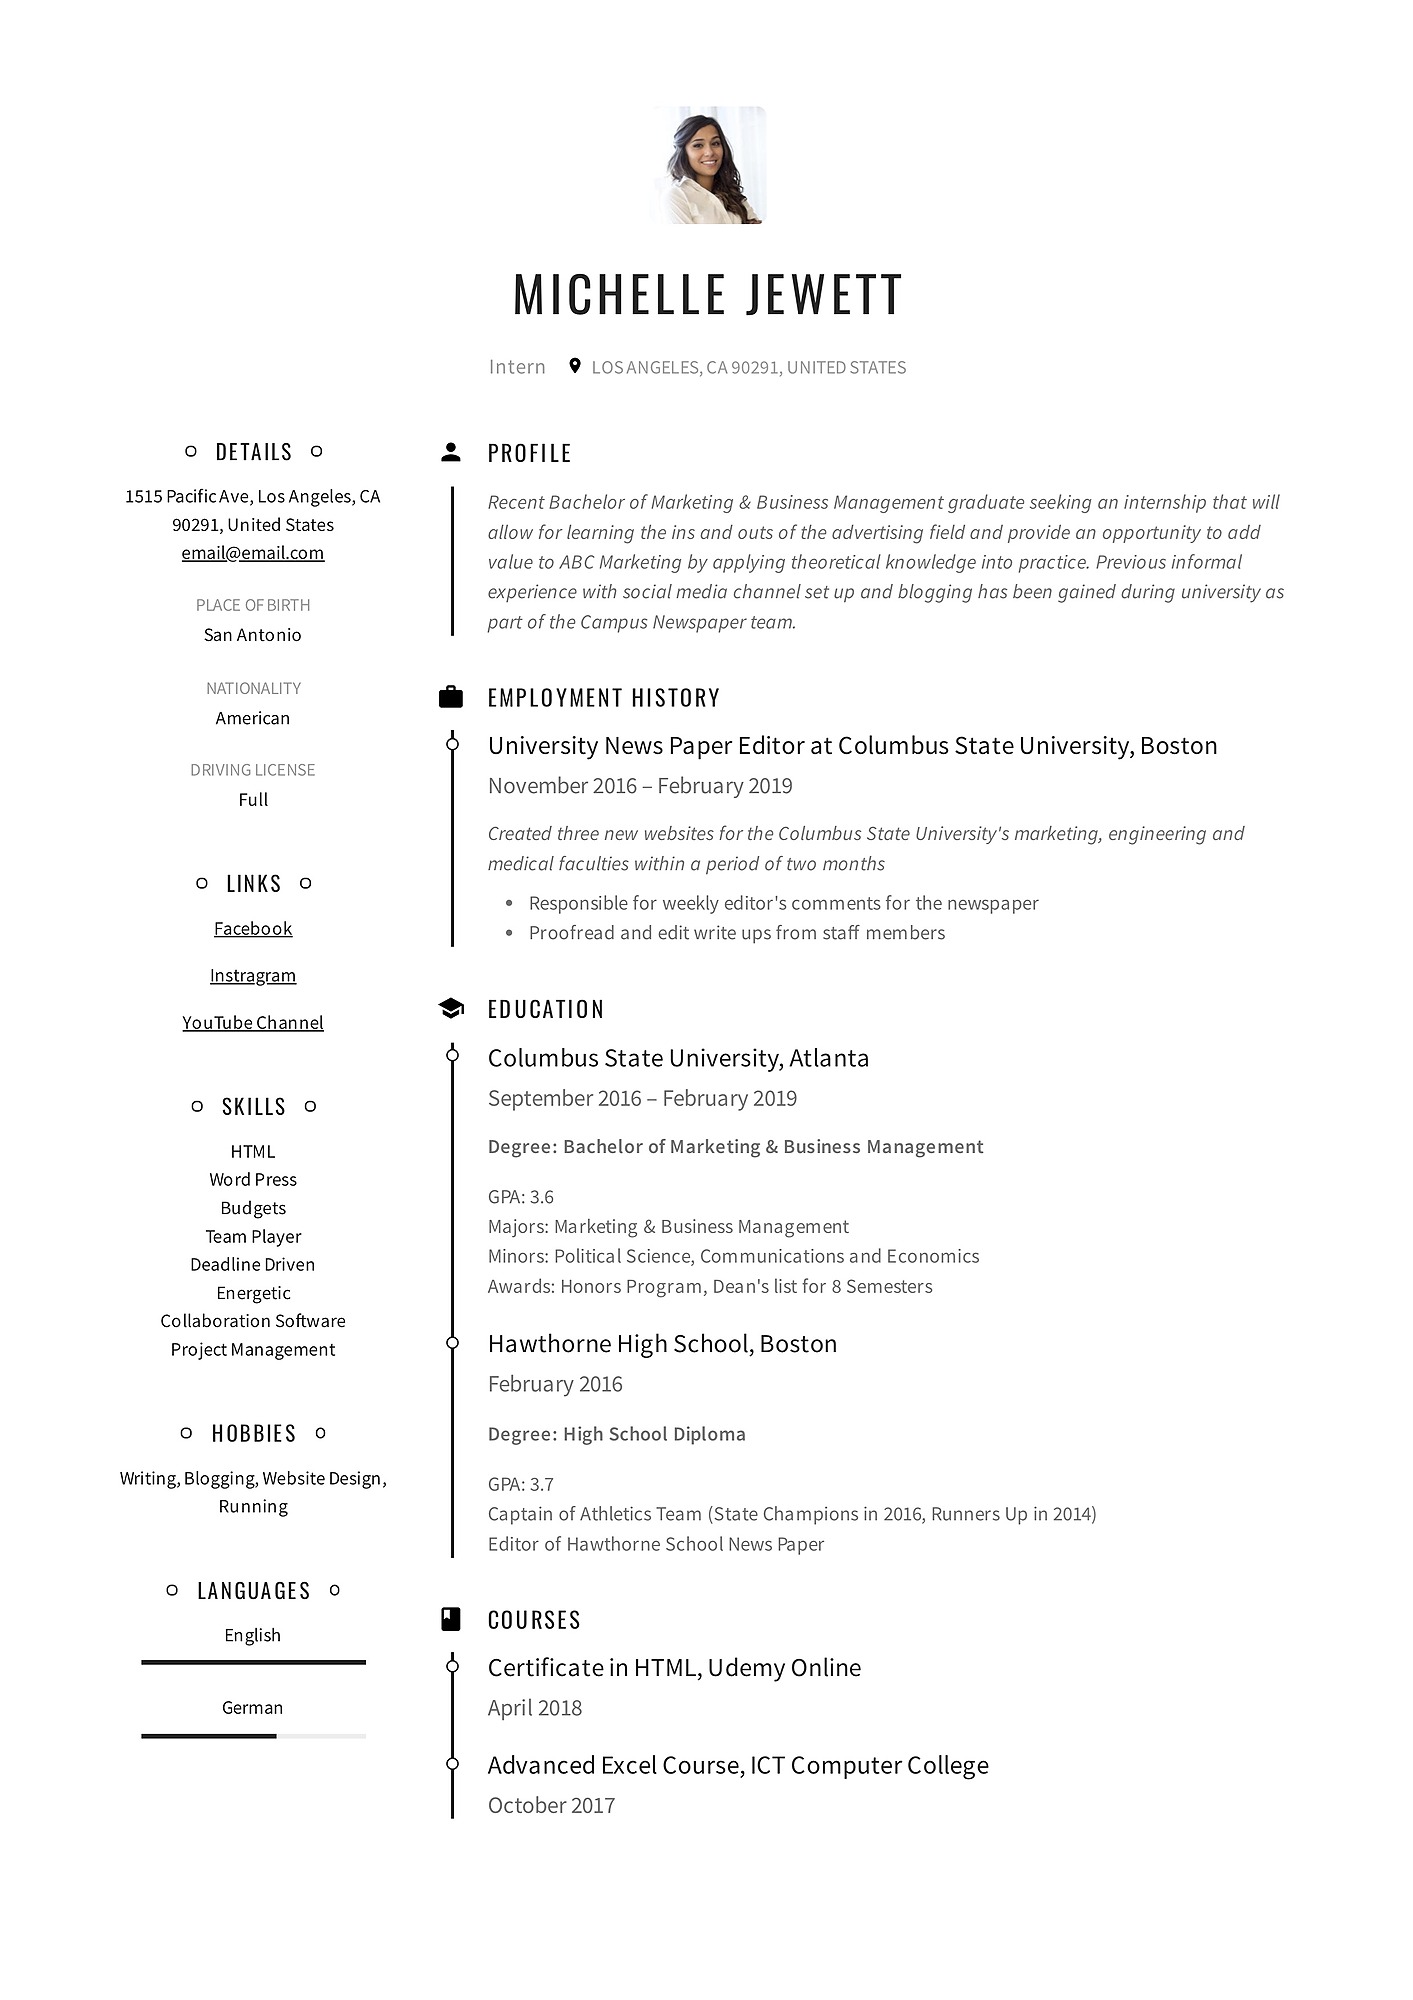 Recent Grad or College Student  How to List Education on Resume